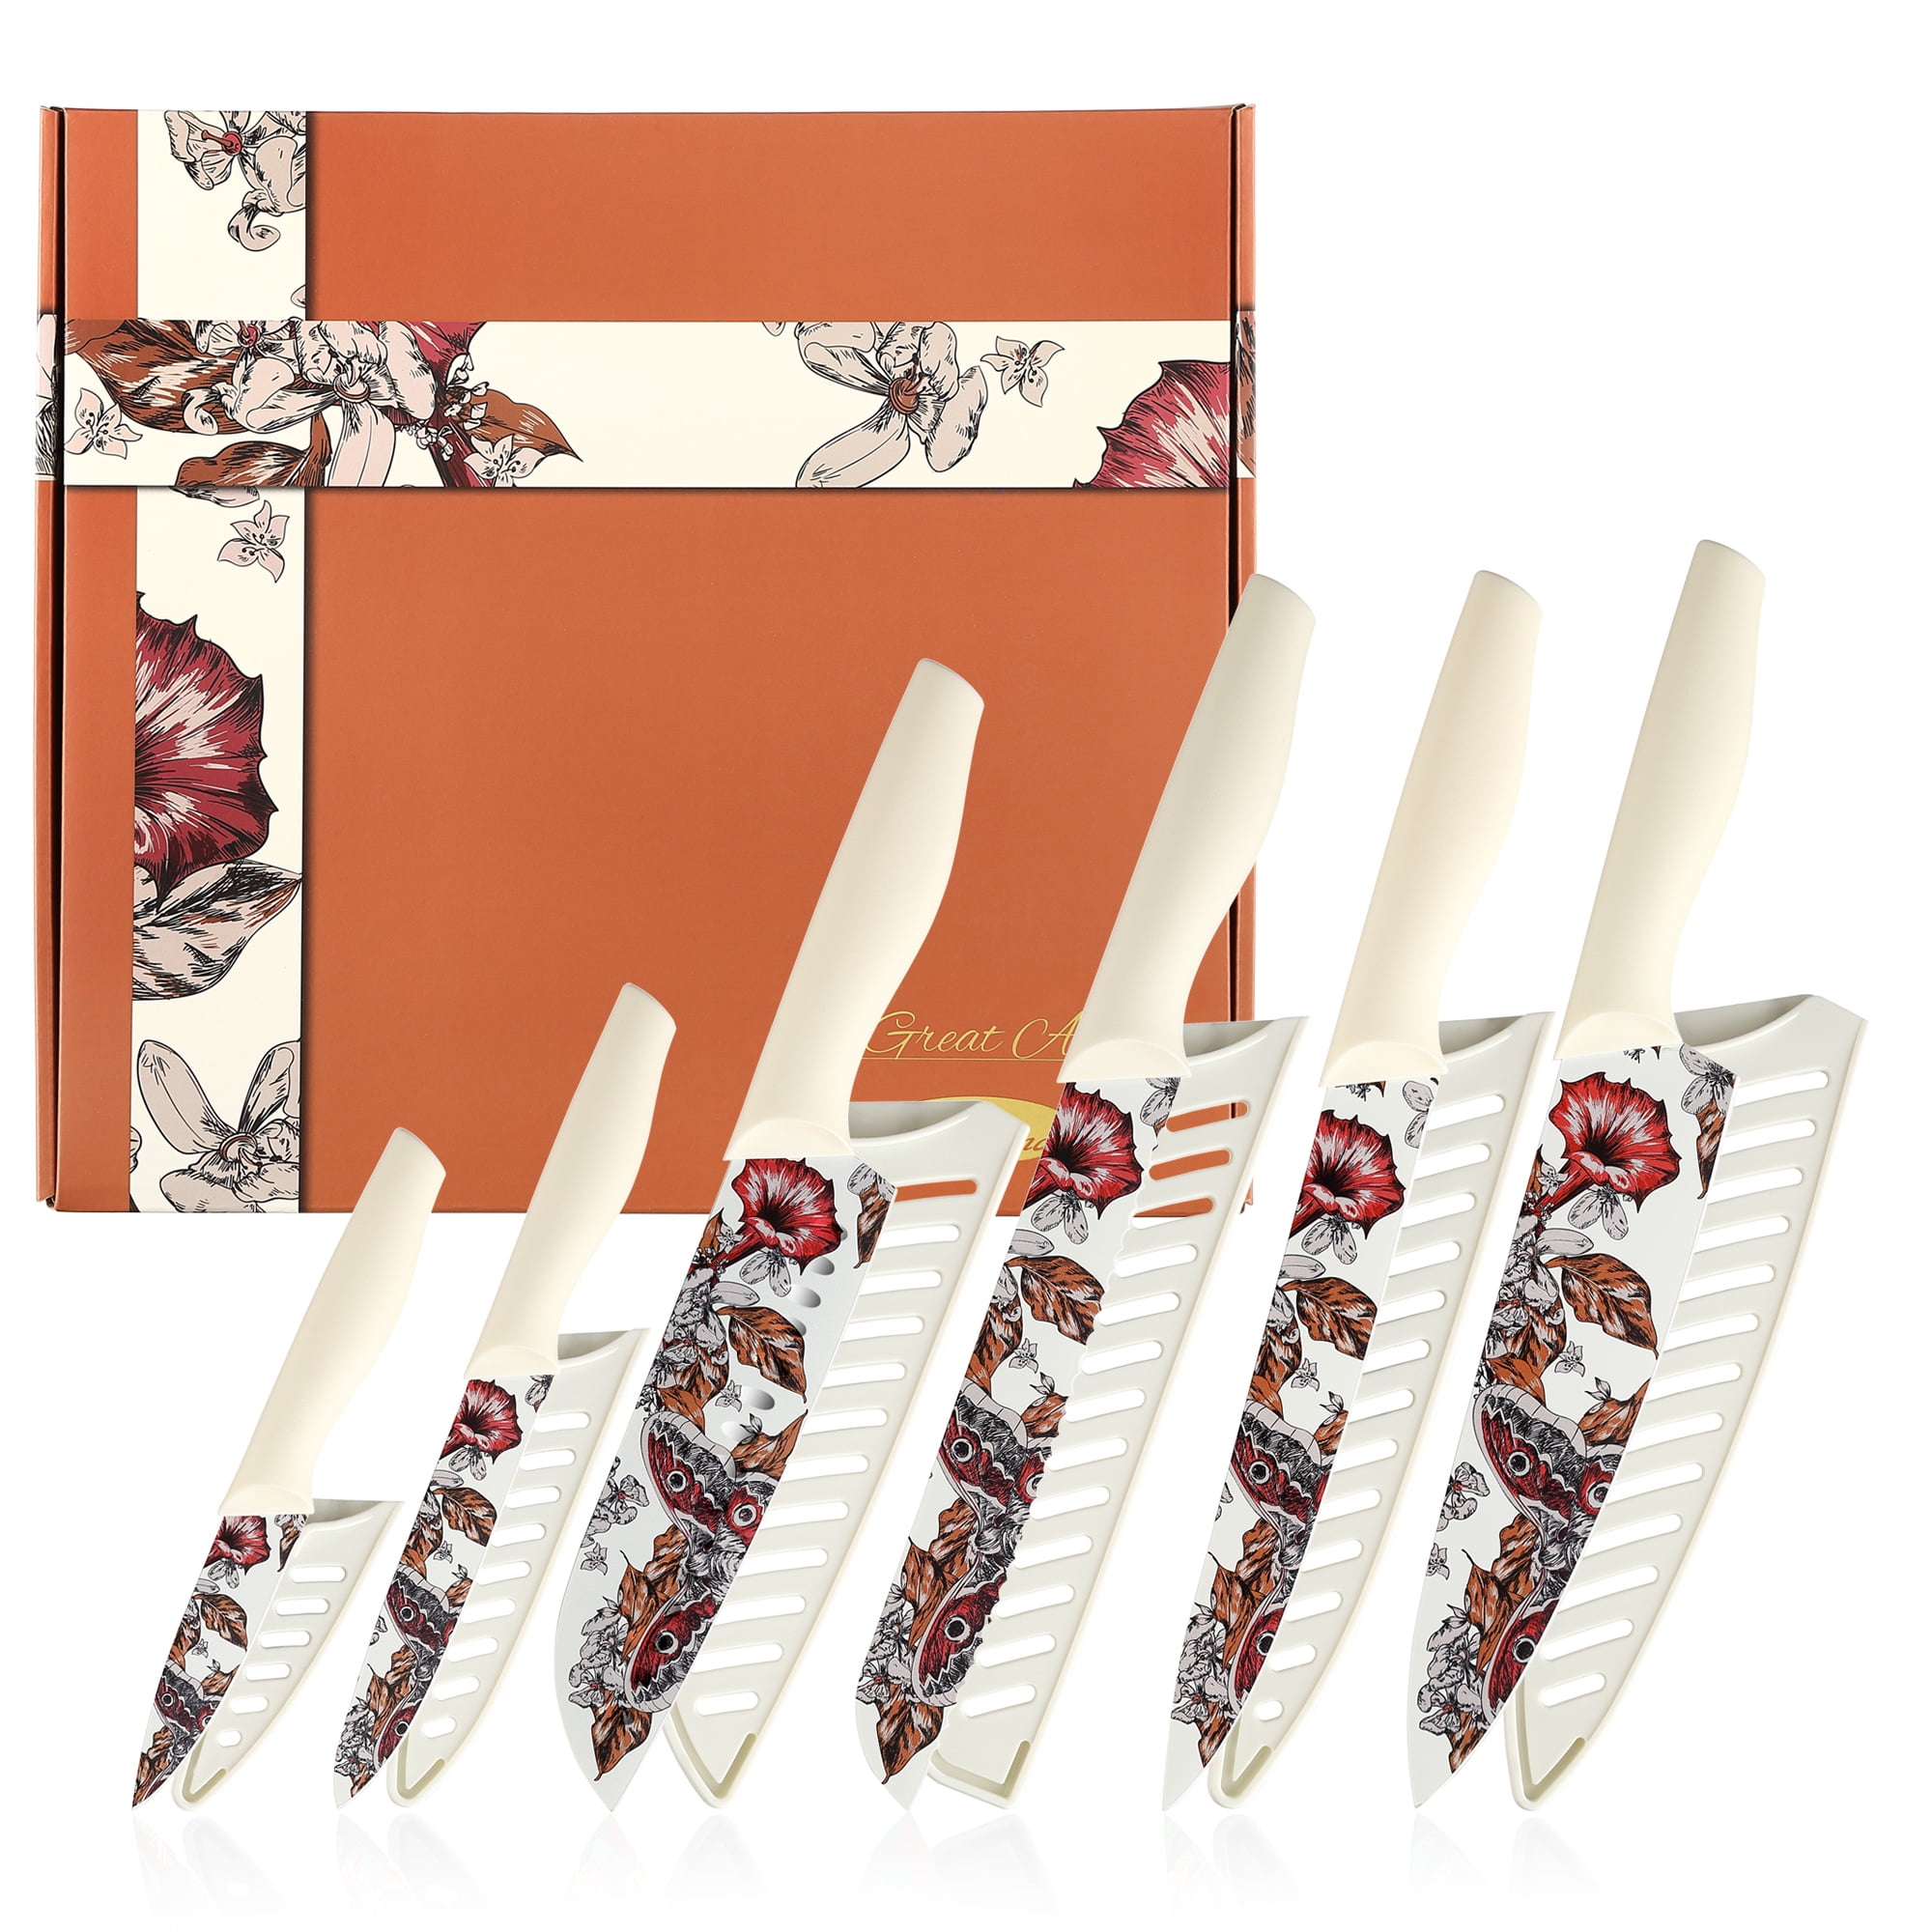 Marco Almond KYA36 6-Pieces Rainbow Knife Set with Blade Guards Dishwasher  Safe Kitchen Cutlery Set 